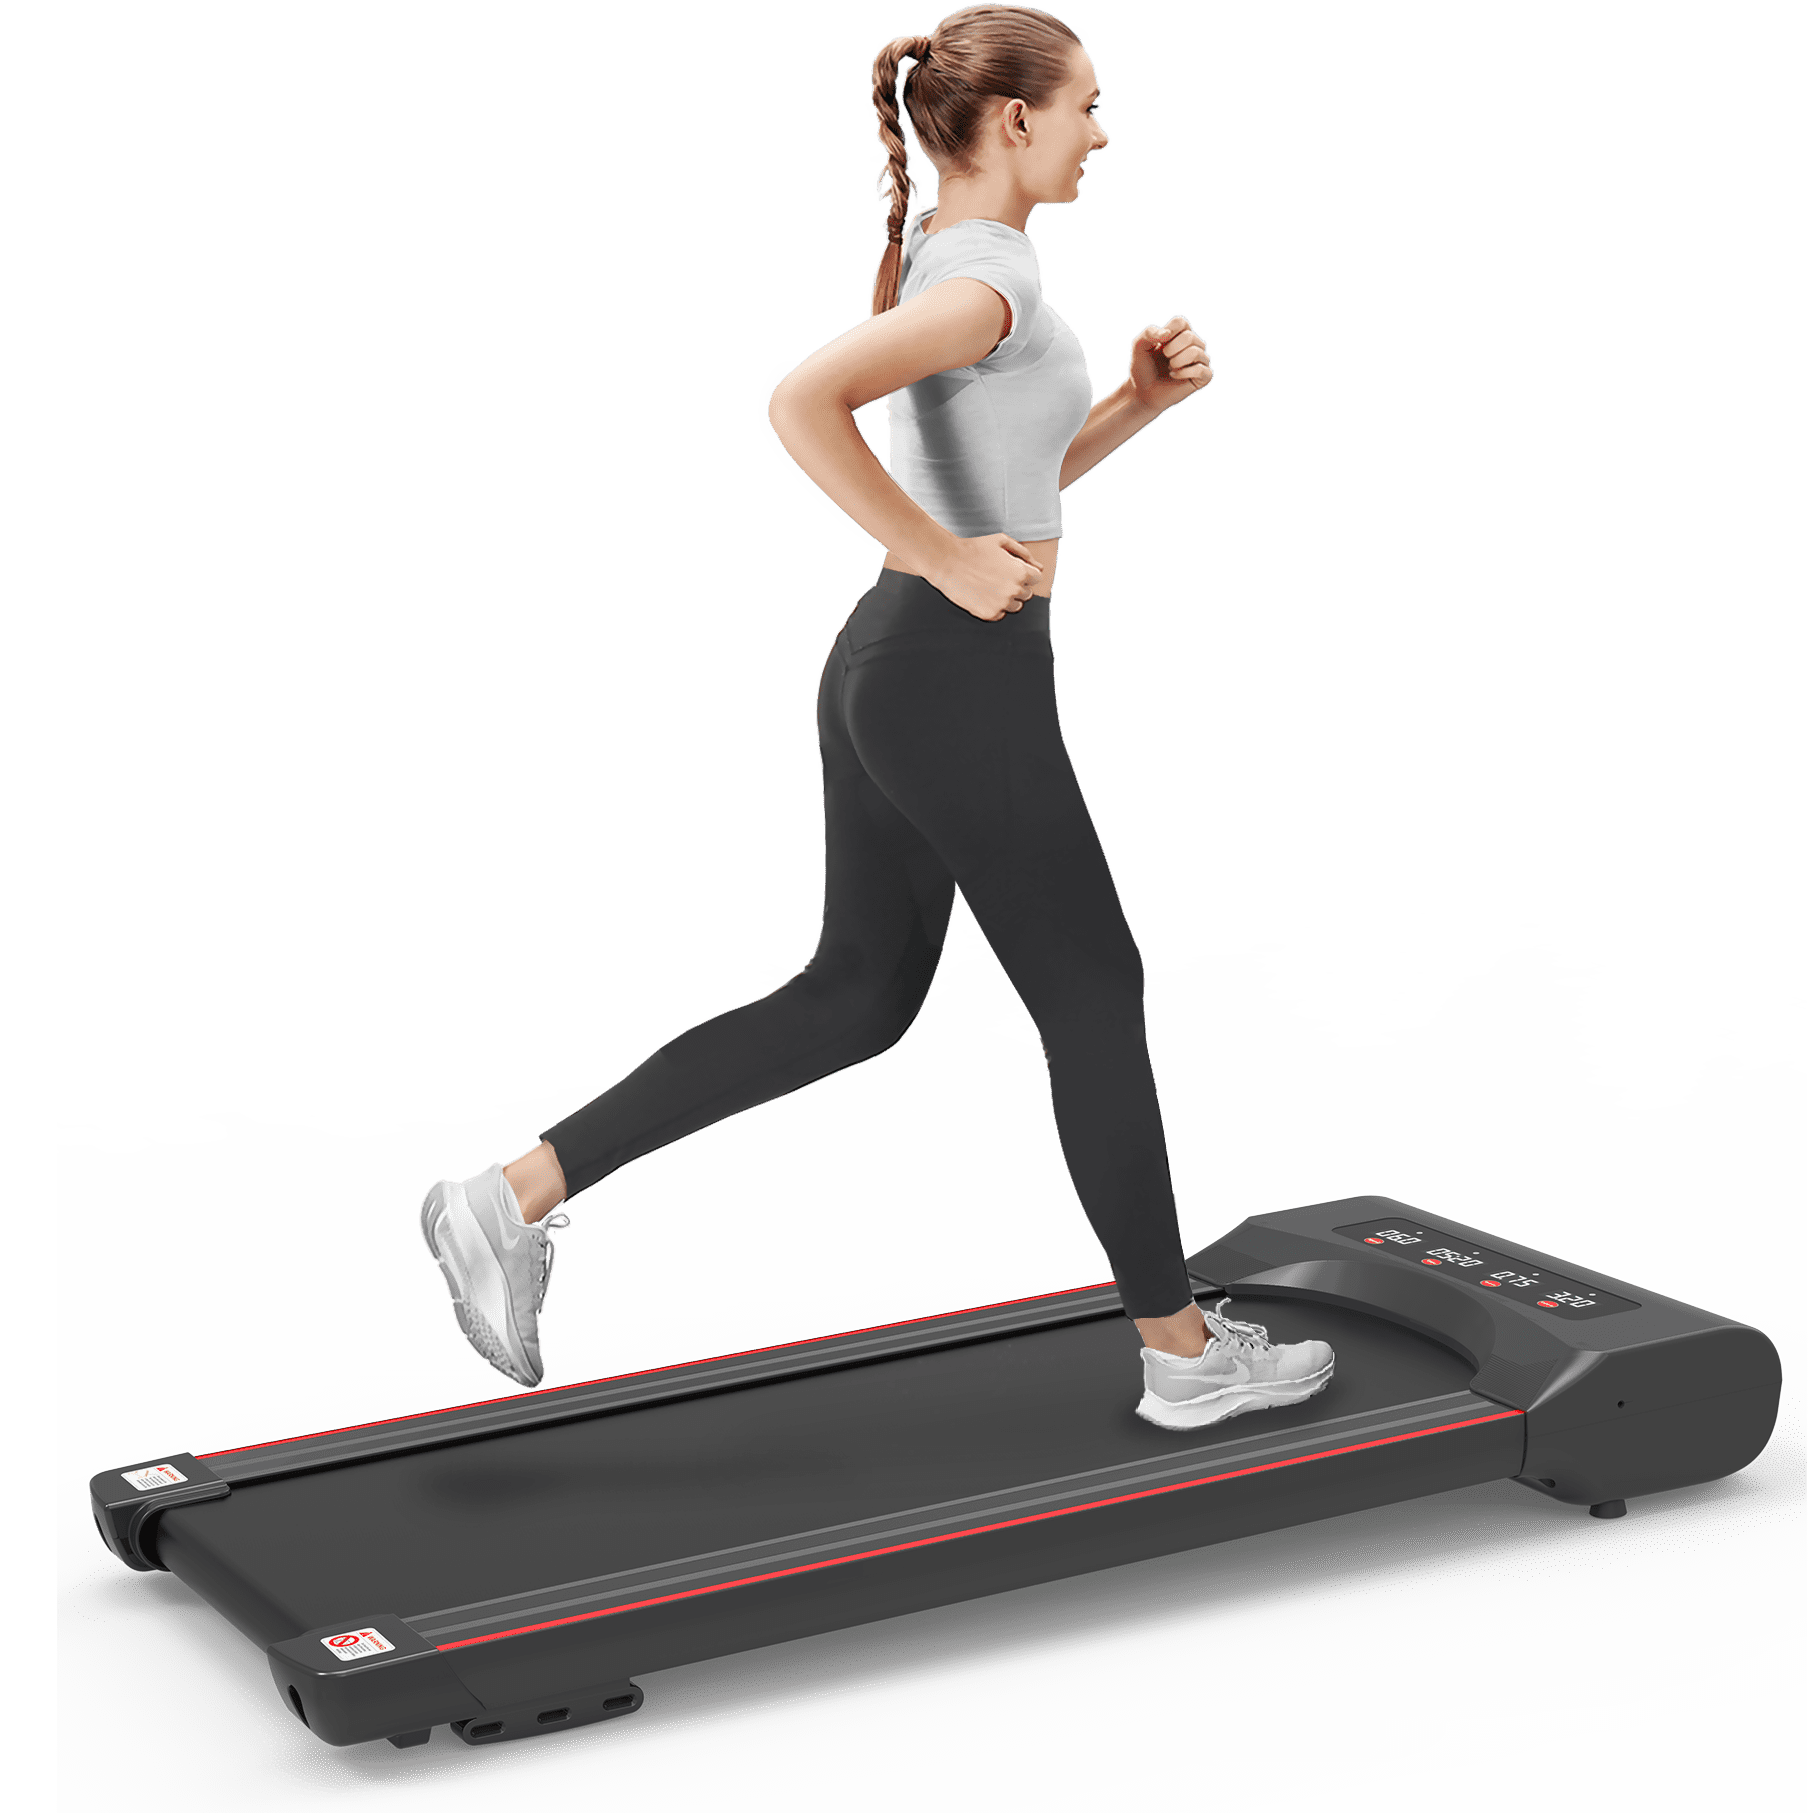 HLAiLL Treadmill for Home,Under Desk Treadmill Portable Walking Pad,Adjustable  Speed, LCD Screen & Calorie Counter, Ultra Thin and Silent, Intended for  Home/Office 